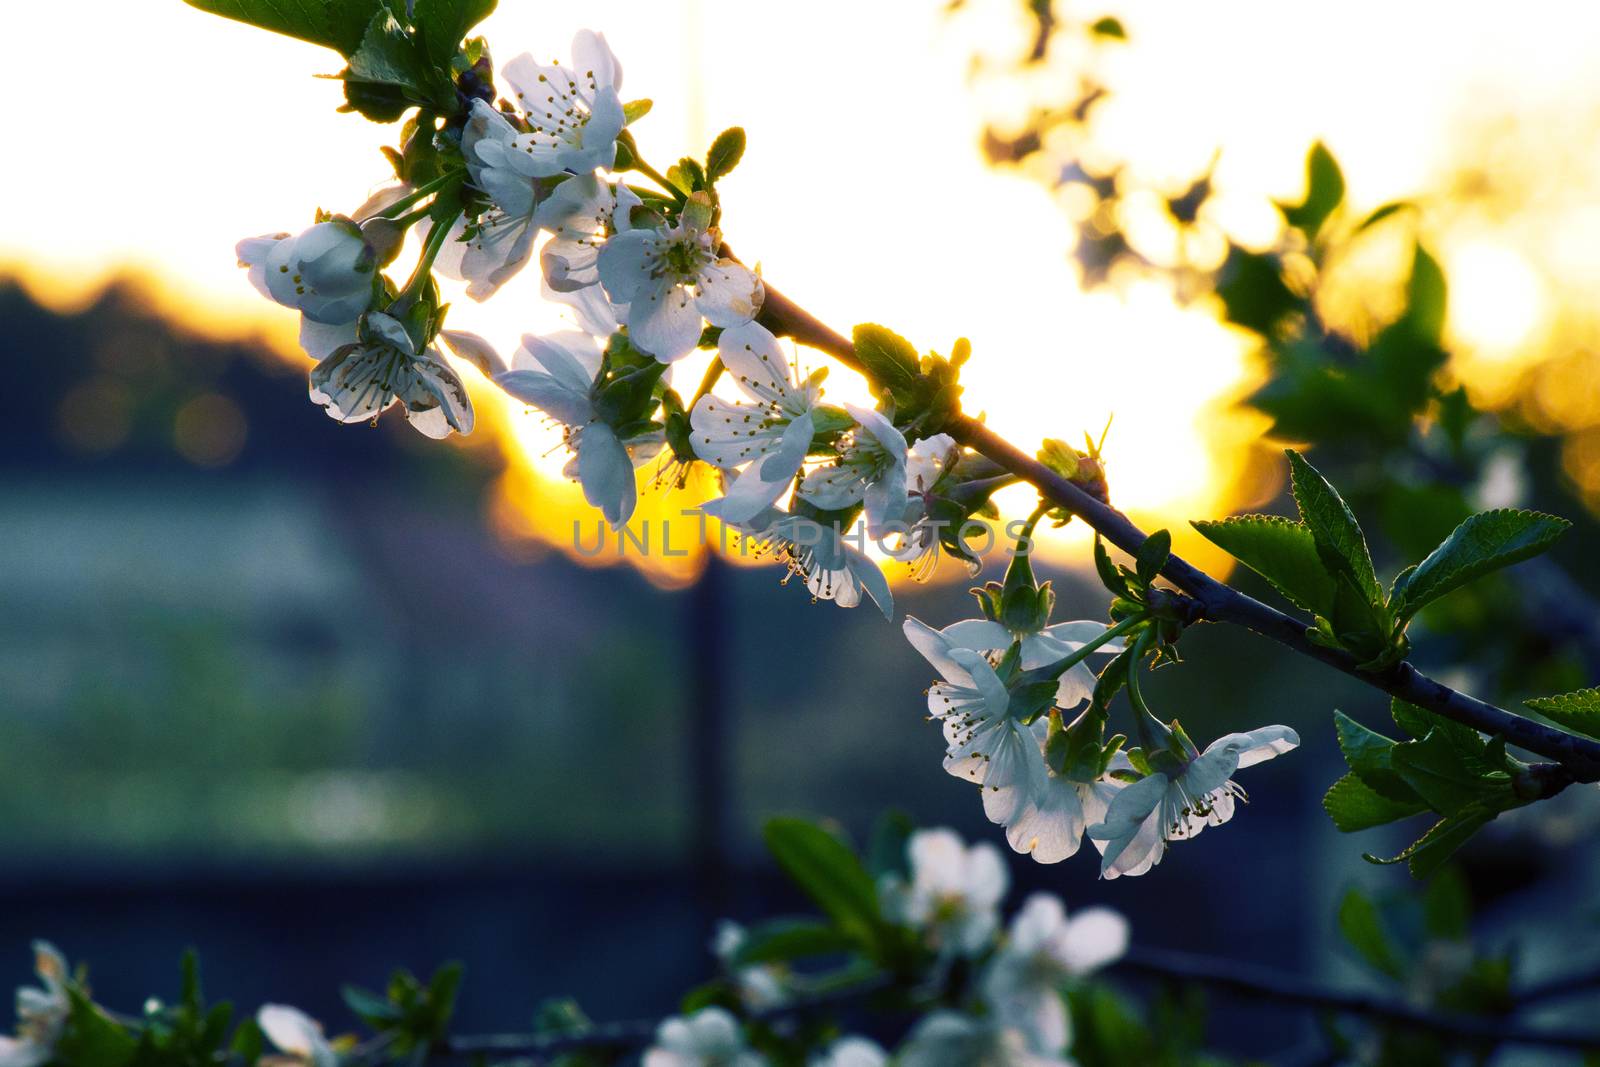 Photo of beautiful cherry blossom, abstract natural background, fine art, spring time season, apple blooming in evening, floral wallpaper, little white flowers on tree branch